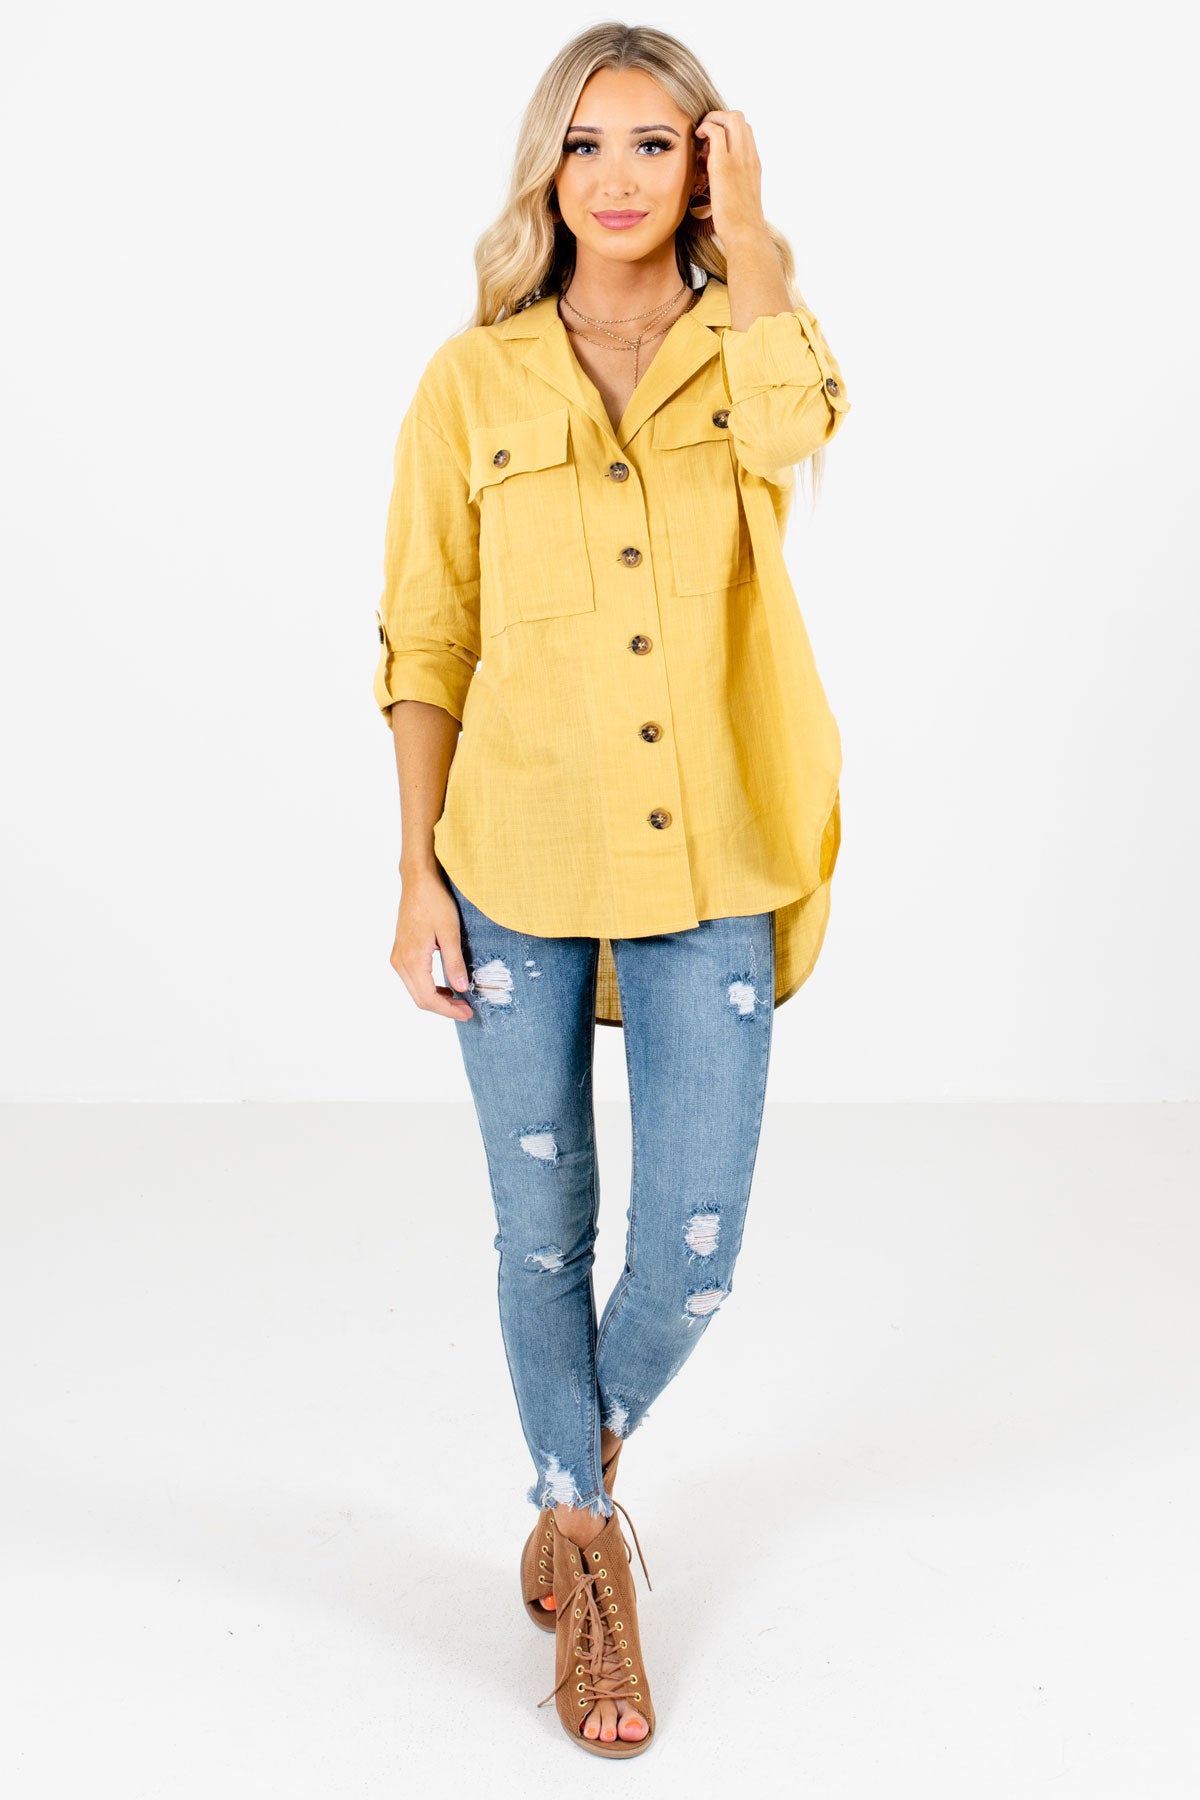 Women’s Yellow Fall and Winter Boutique Clothing